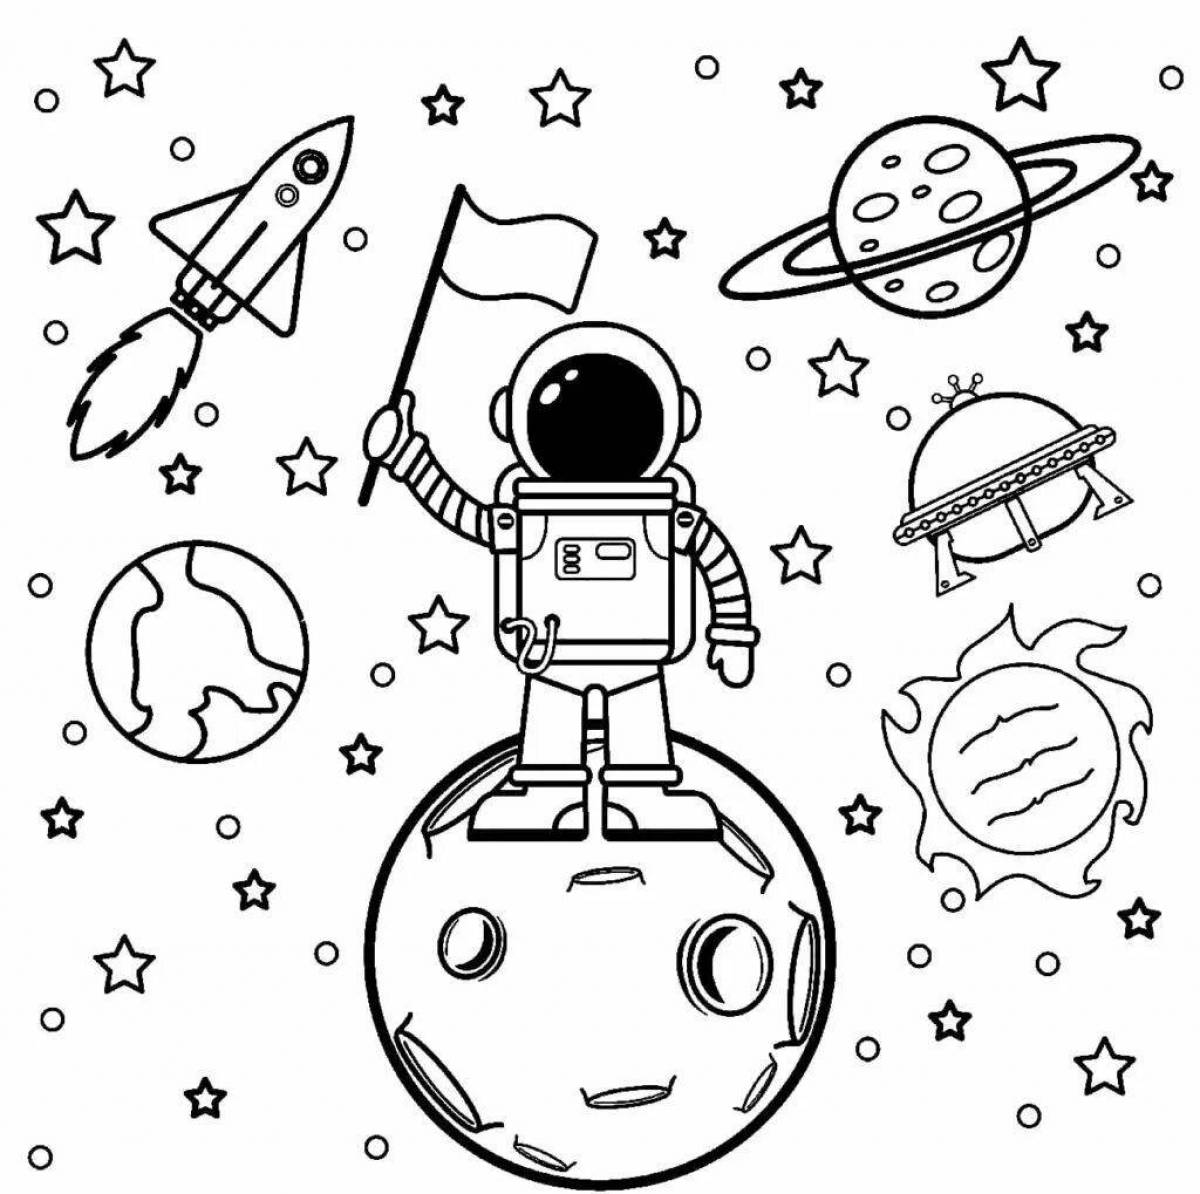 Coloring page incredible astronaut on the moon